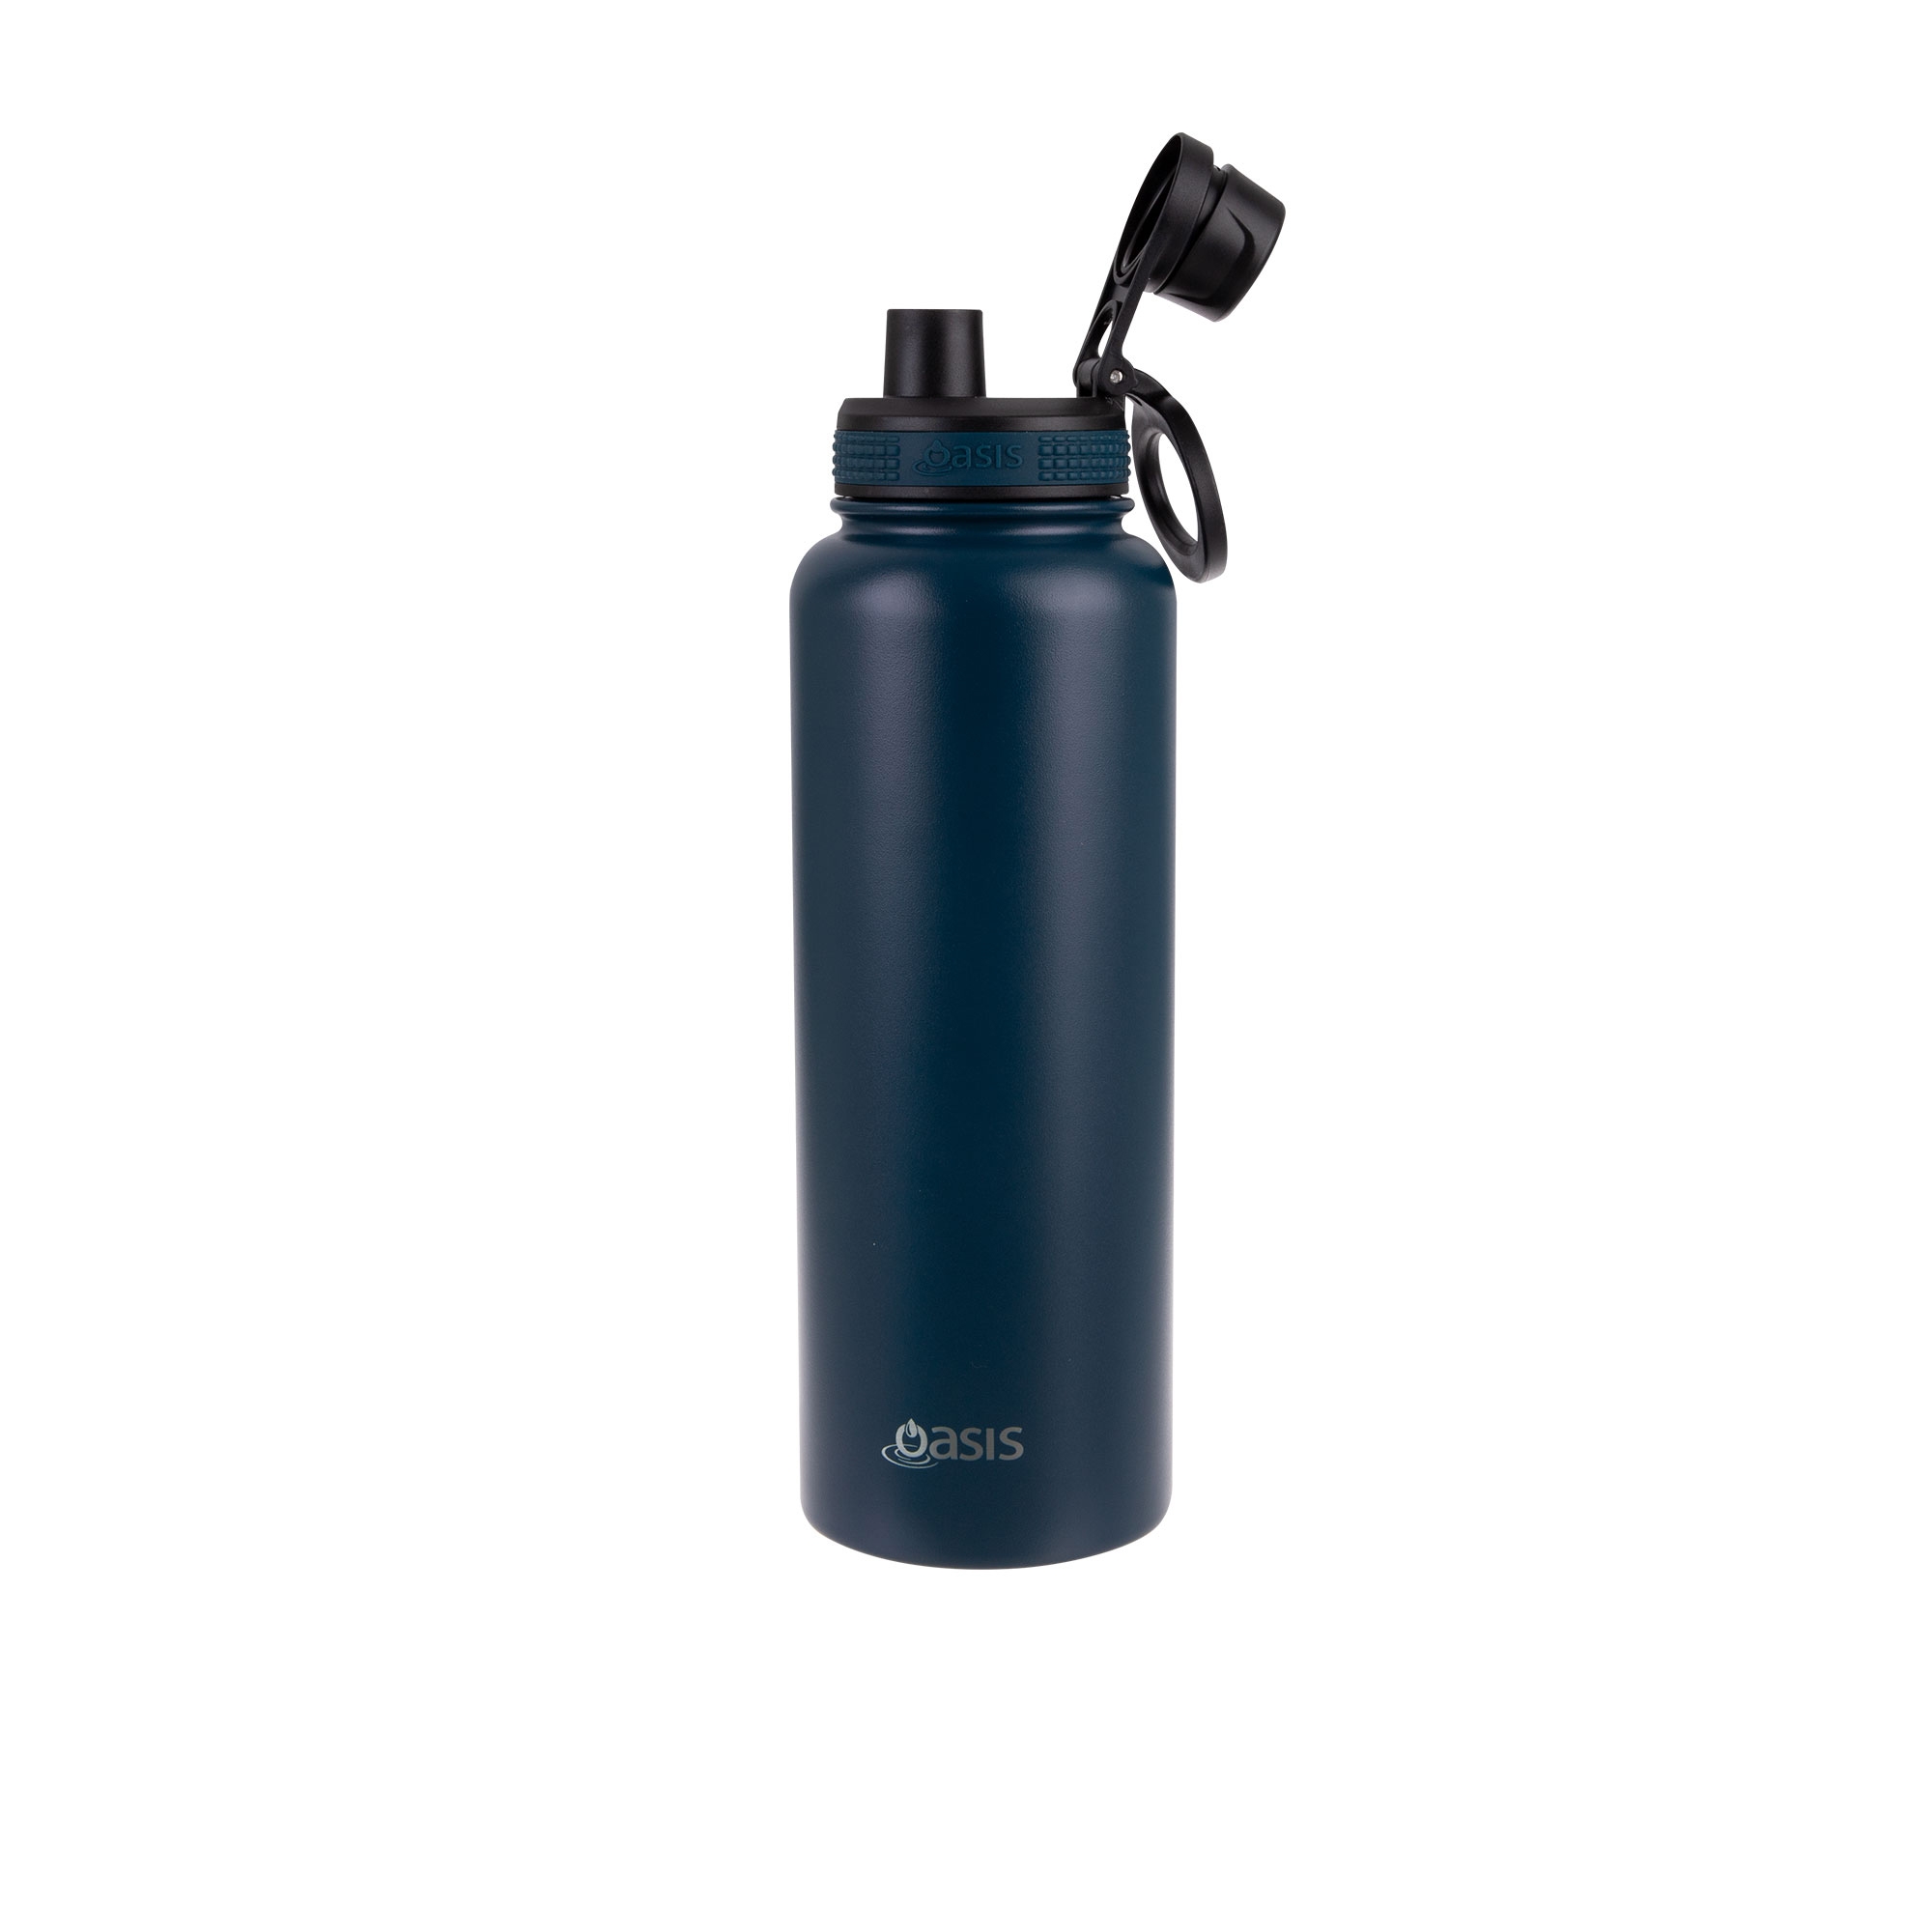 Oasis Challenger Double Wall Insulated Sports Bottle 1.1L Navy Image 2